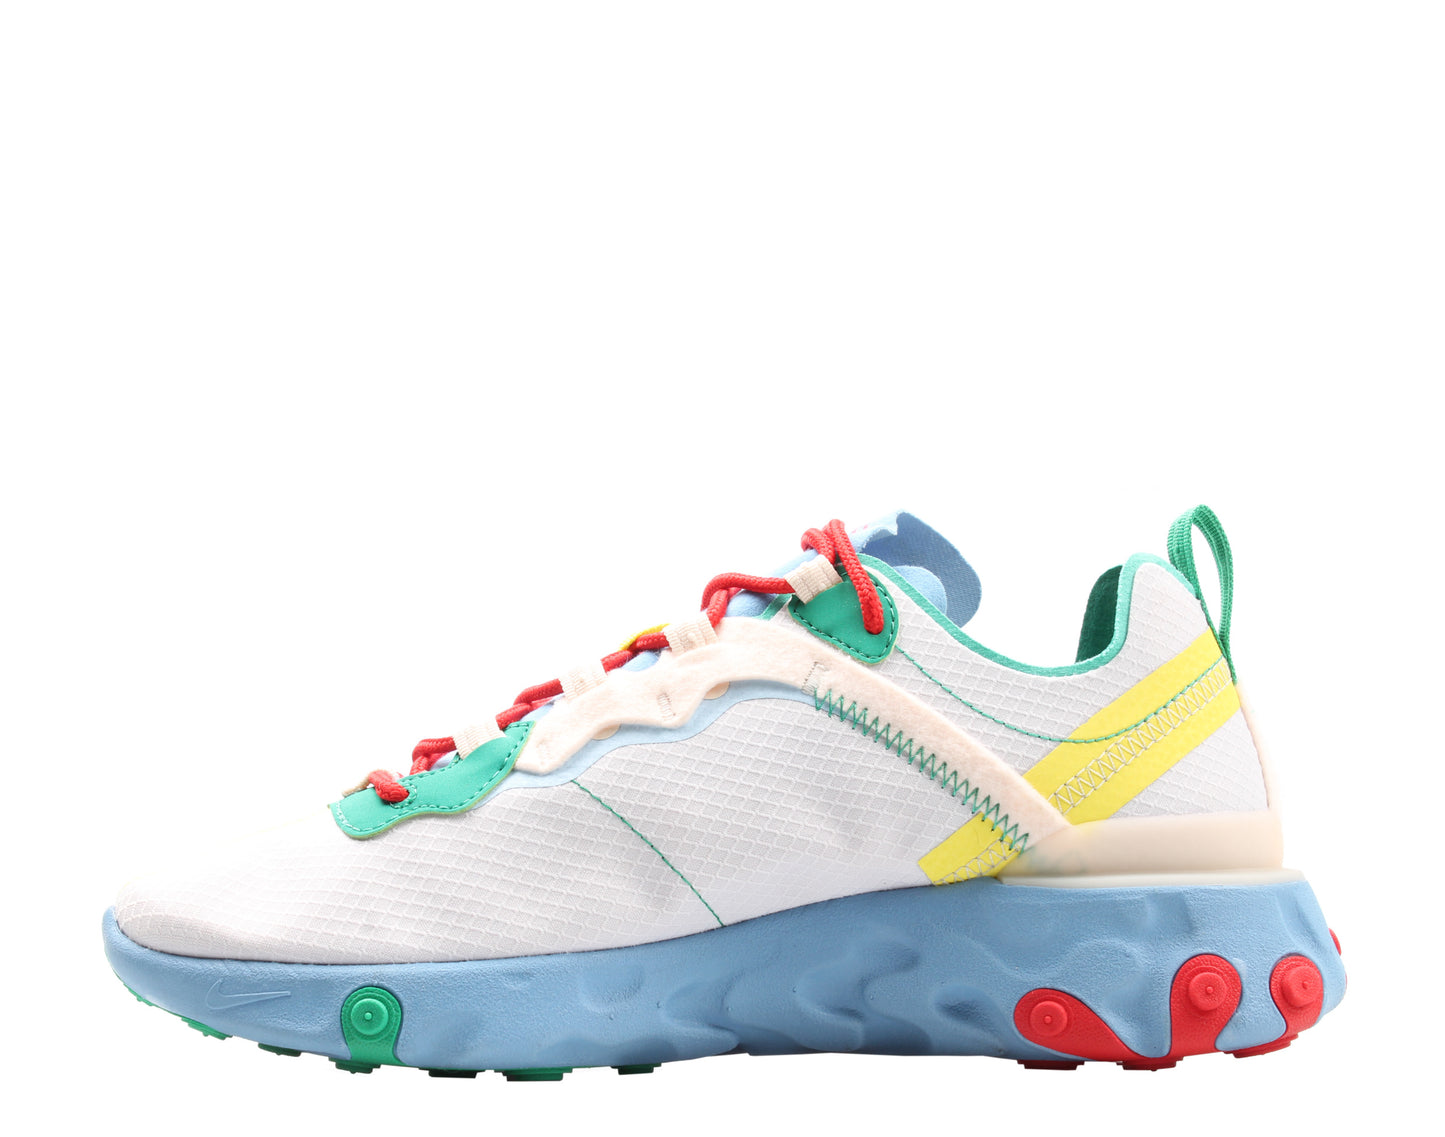 Nike React Element 55 SE Guava Ice/Green-Blue Men's Running Shoes CT1142-800